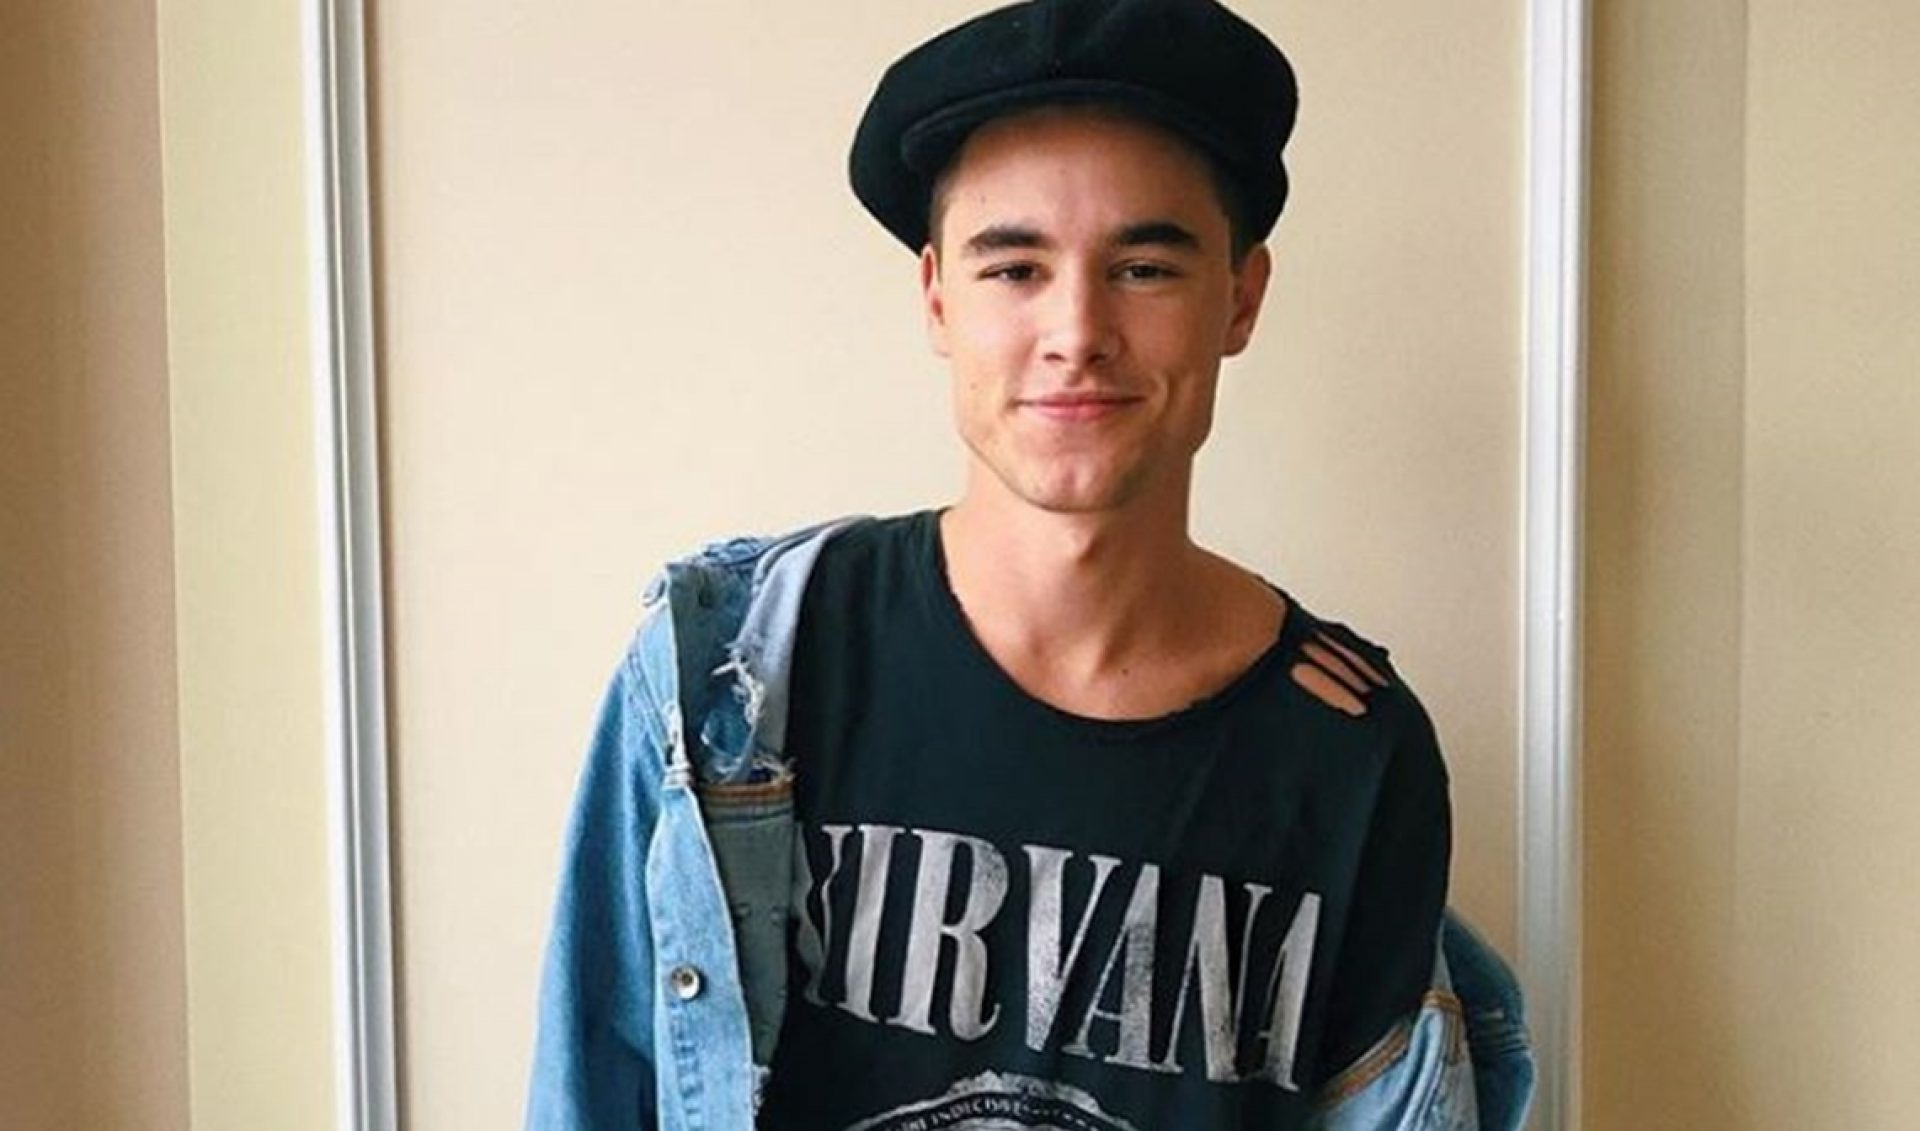 YouTuber-Actor Kian Lawley Dropped By CAA After Racist Video Resurfaces